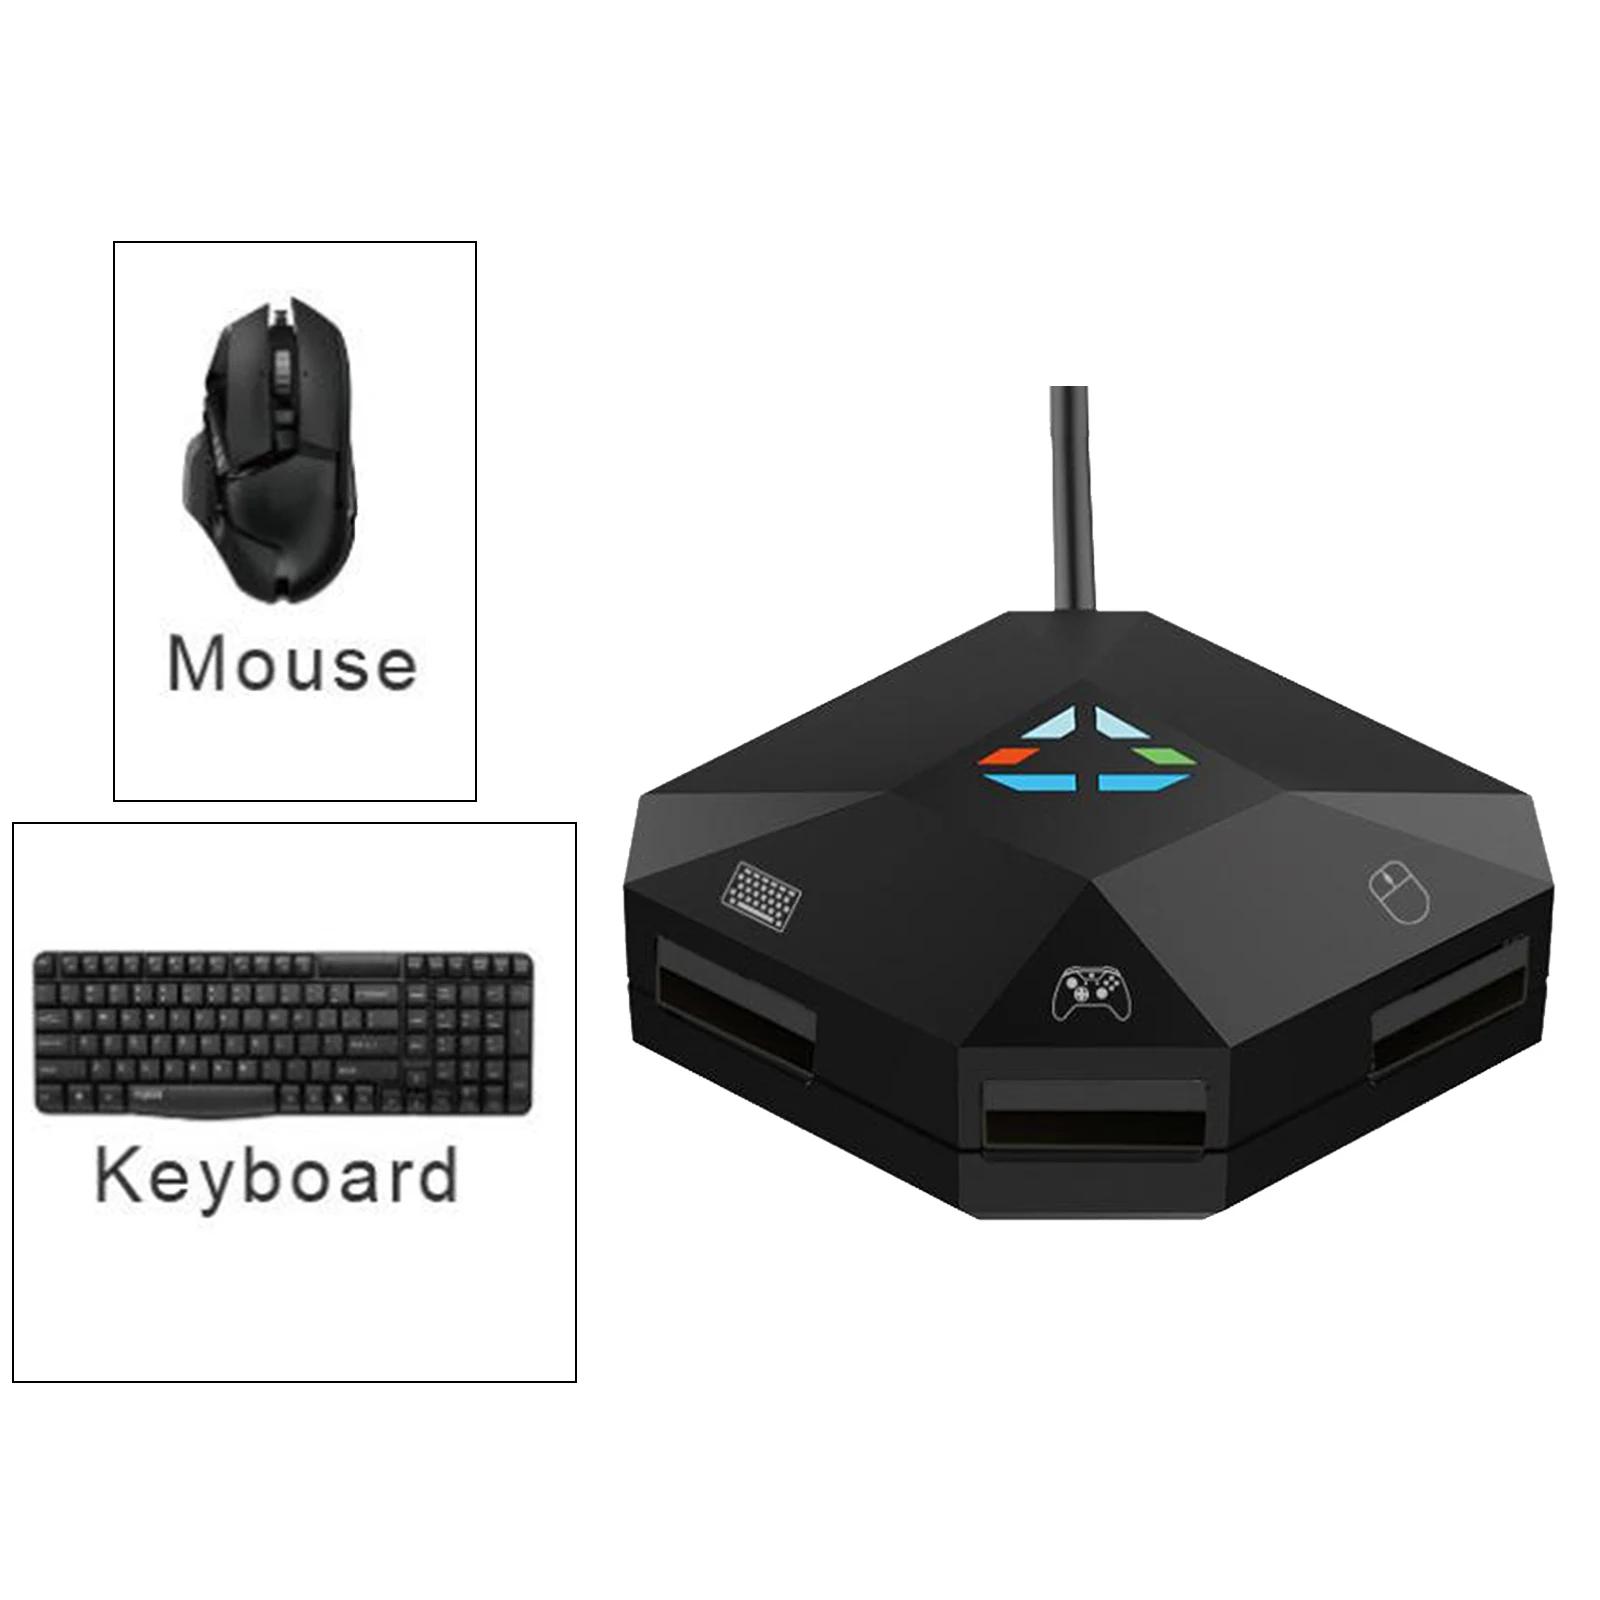 Keyboard with Mouse Converter Adapter fits for N-Switch etc. Gaming Console, Easy to Use, Plug And Play